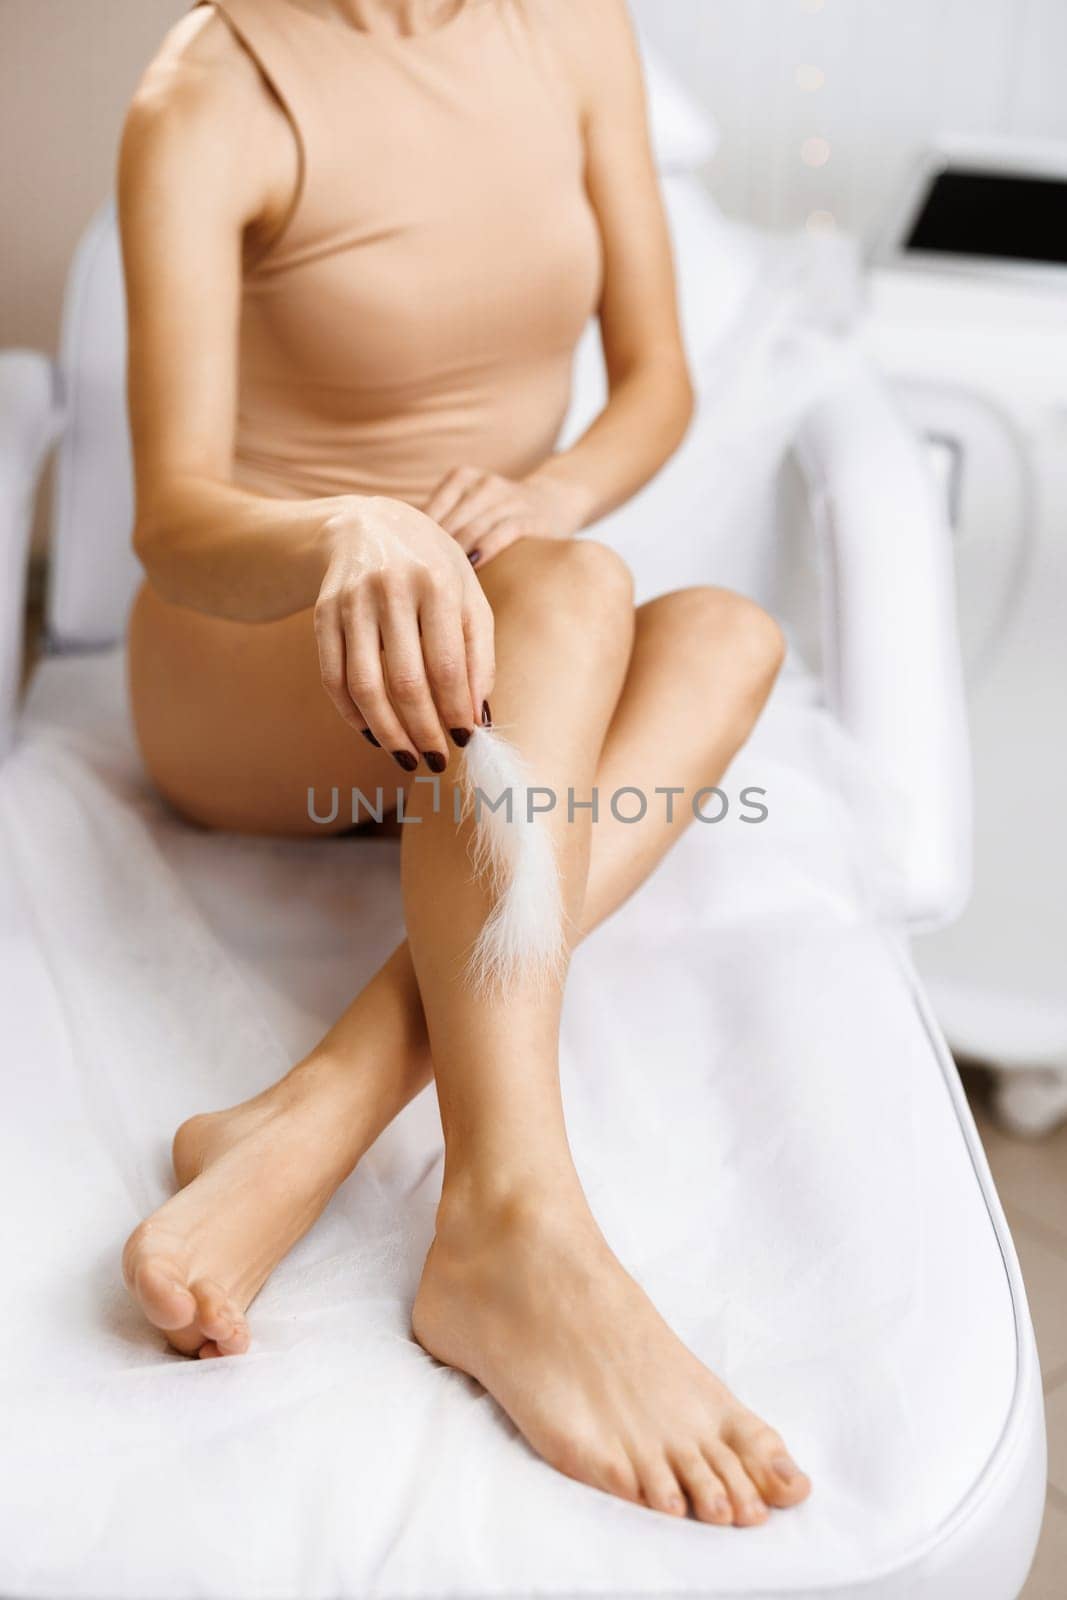 Young Woman's Hand Touching Her Legs With White Feather. Female feet with smooth skin and soft feather. Beautiful Body Care Concepts.